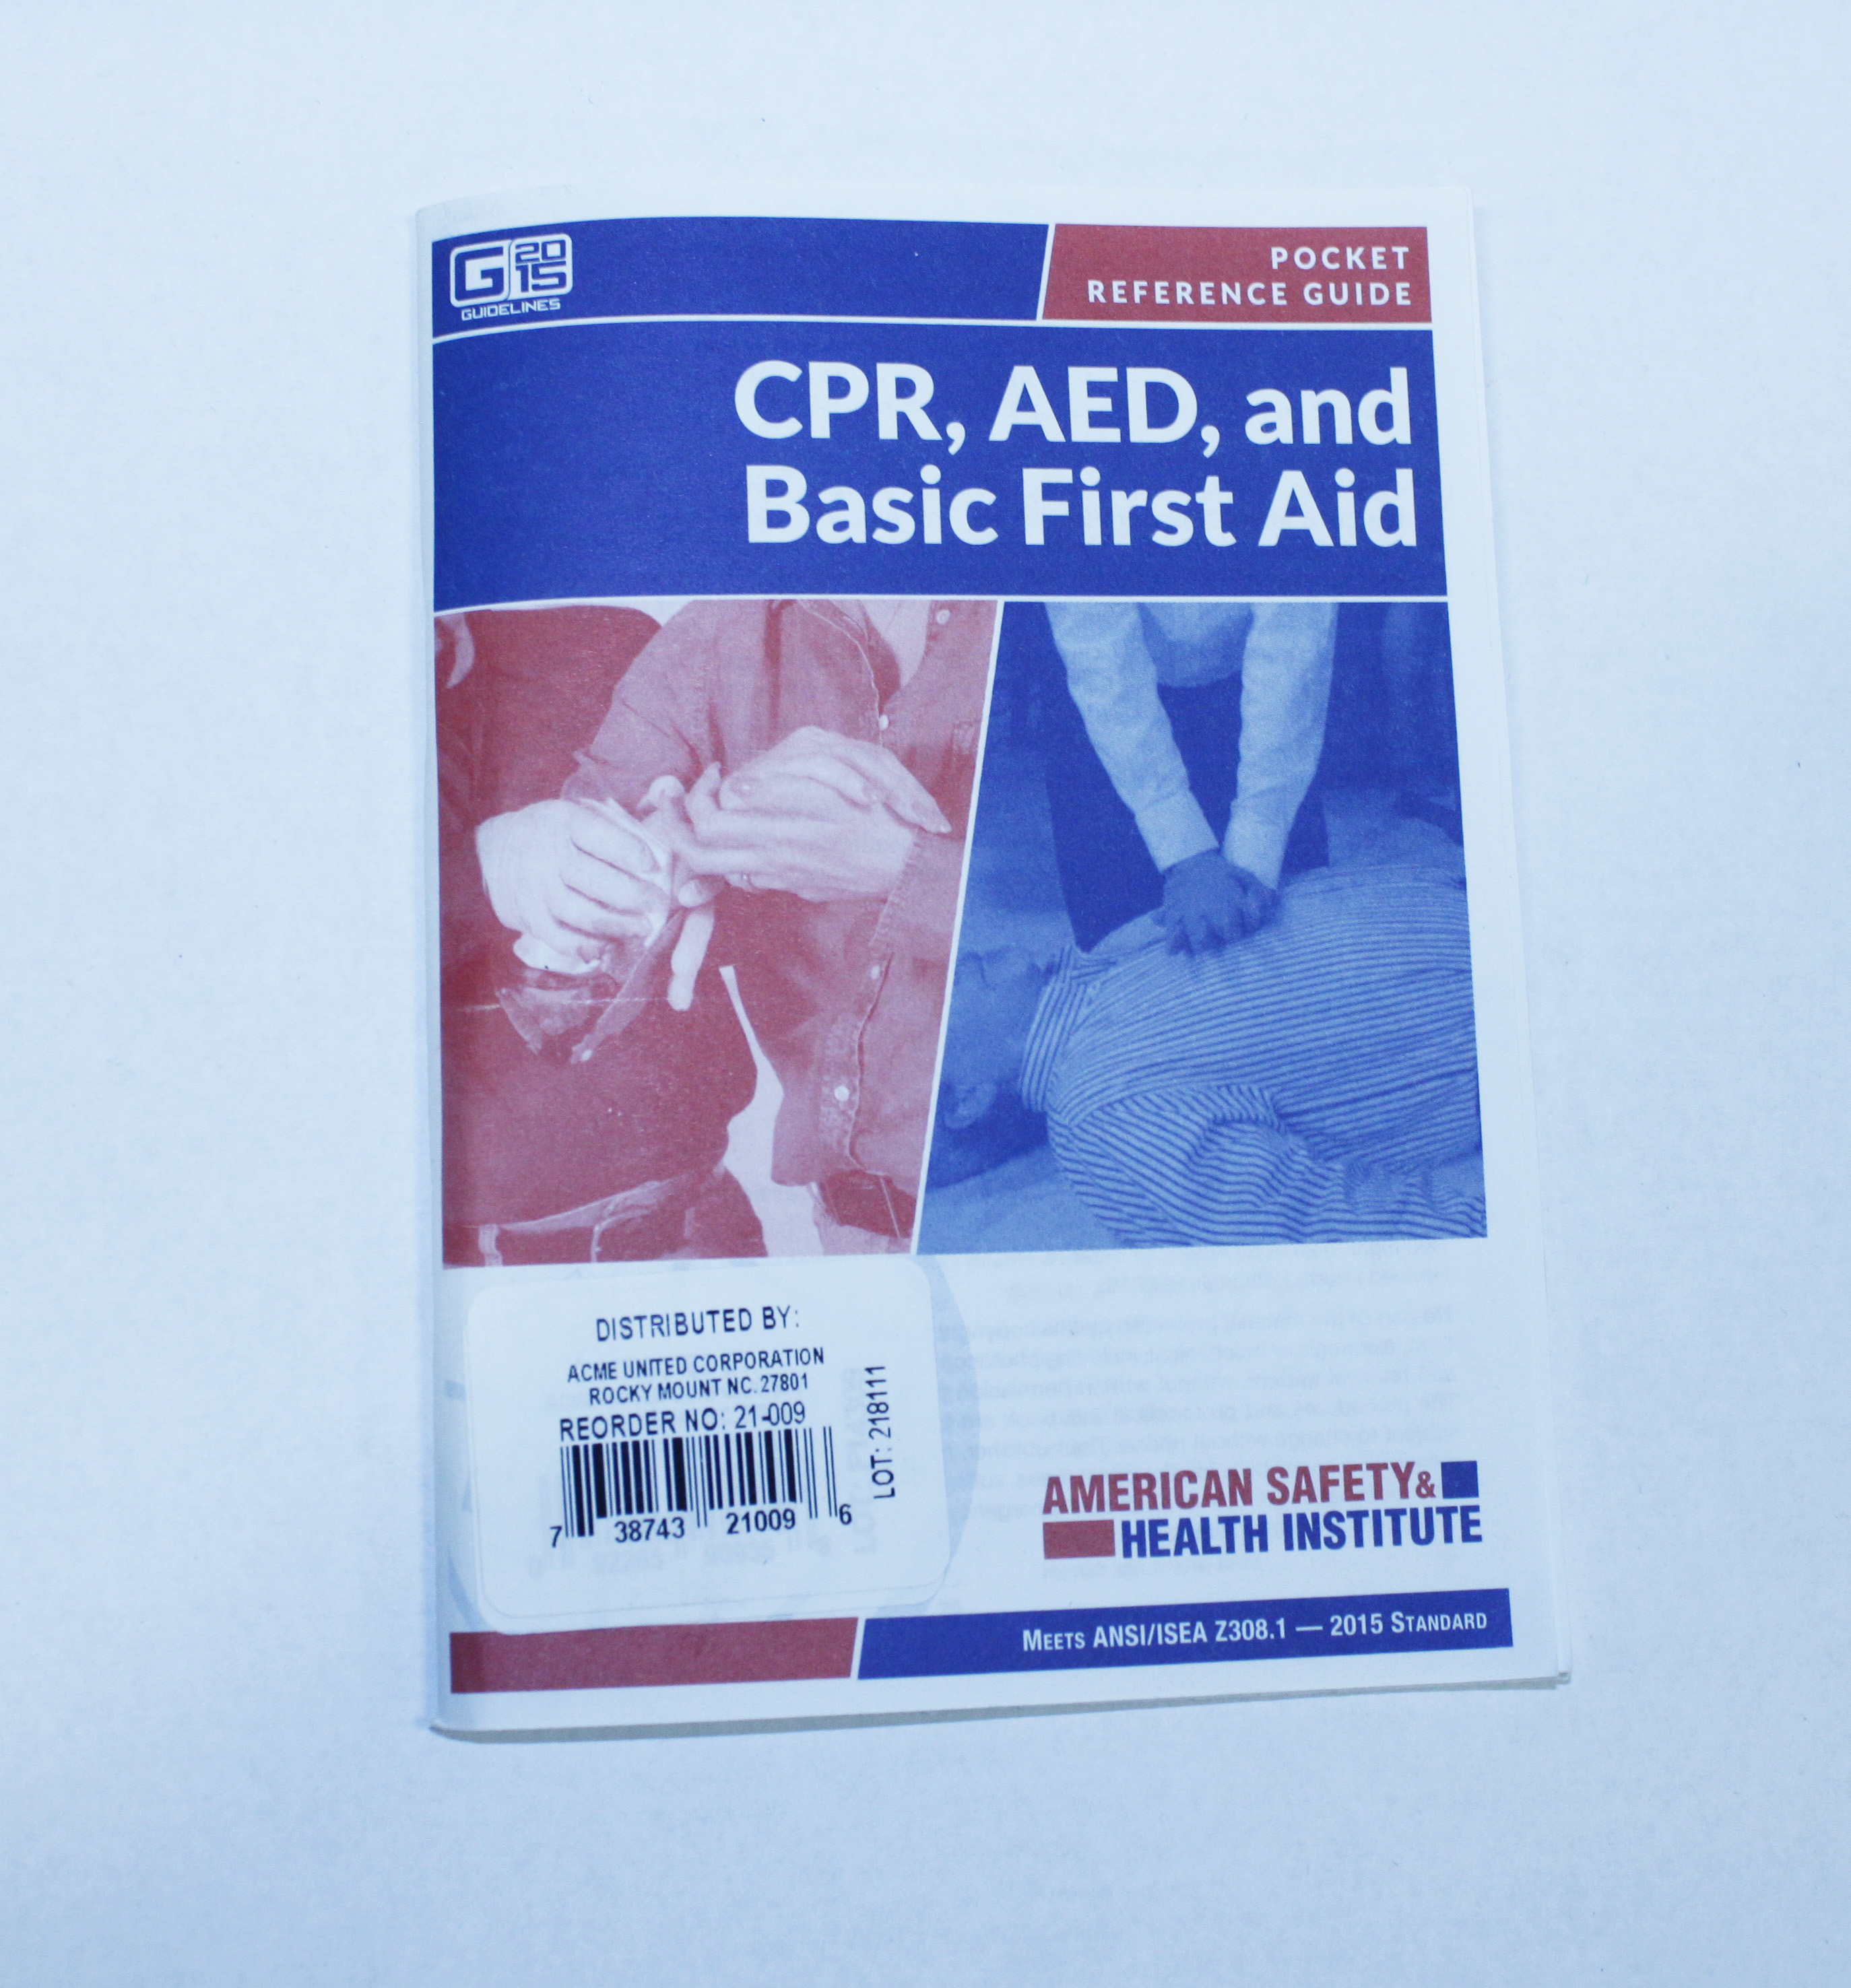 CPR, Basic Aid guide